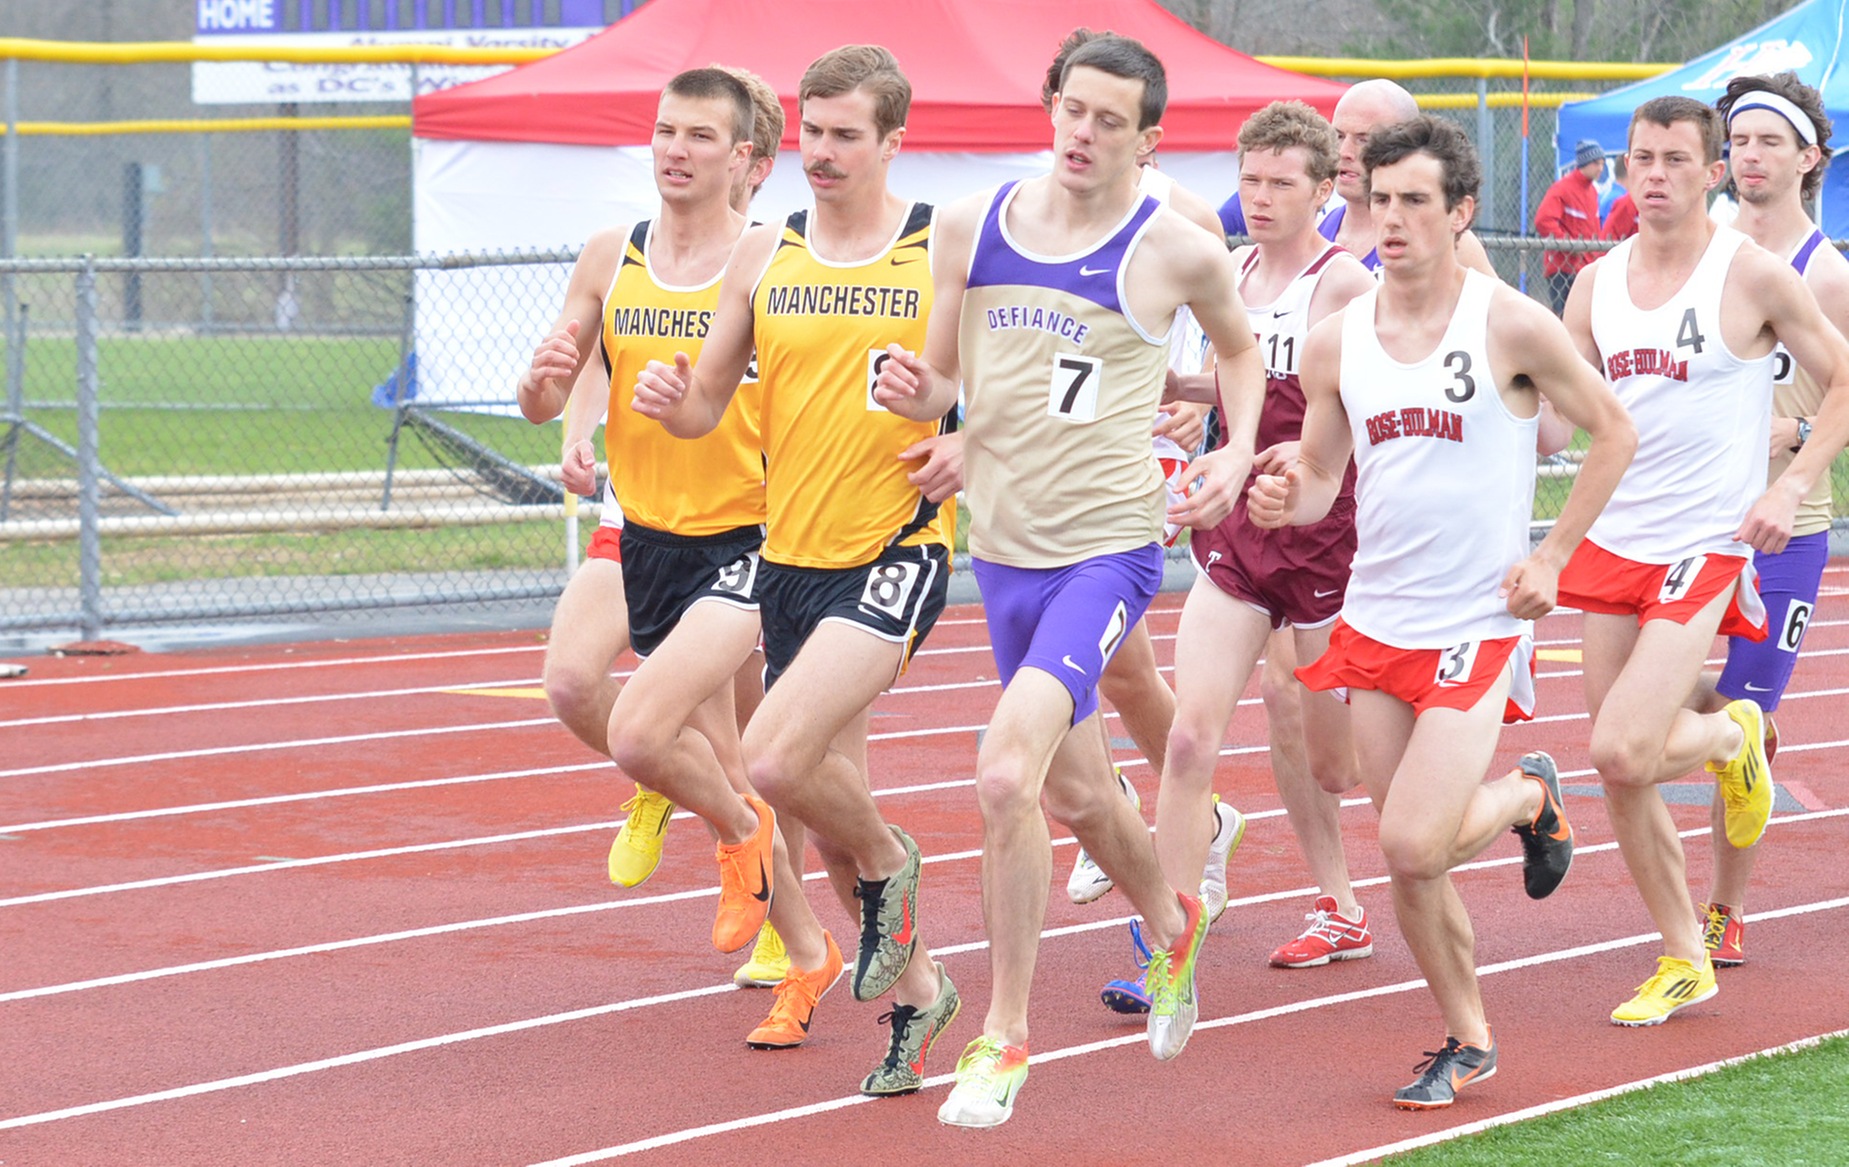 Three runners have strong showing at Fred Wilt Invitational